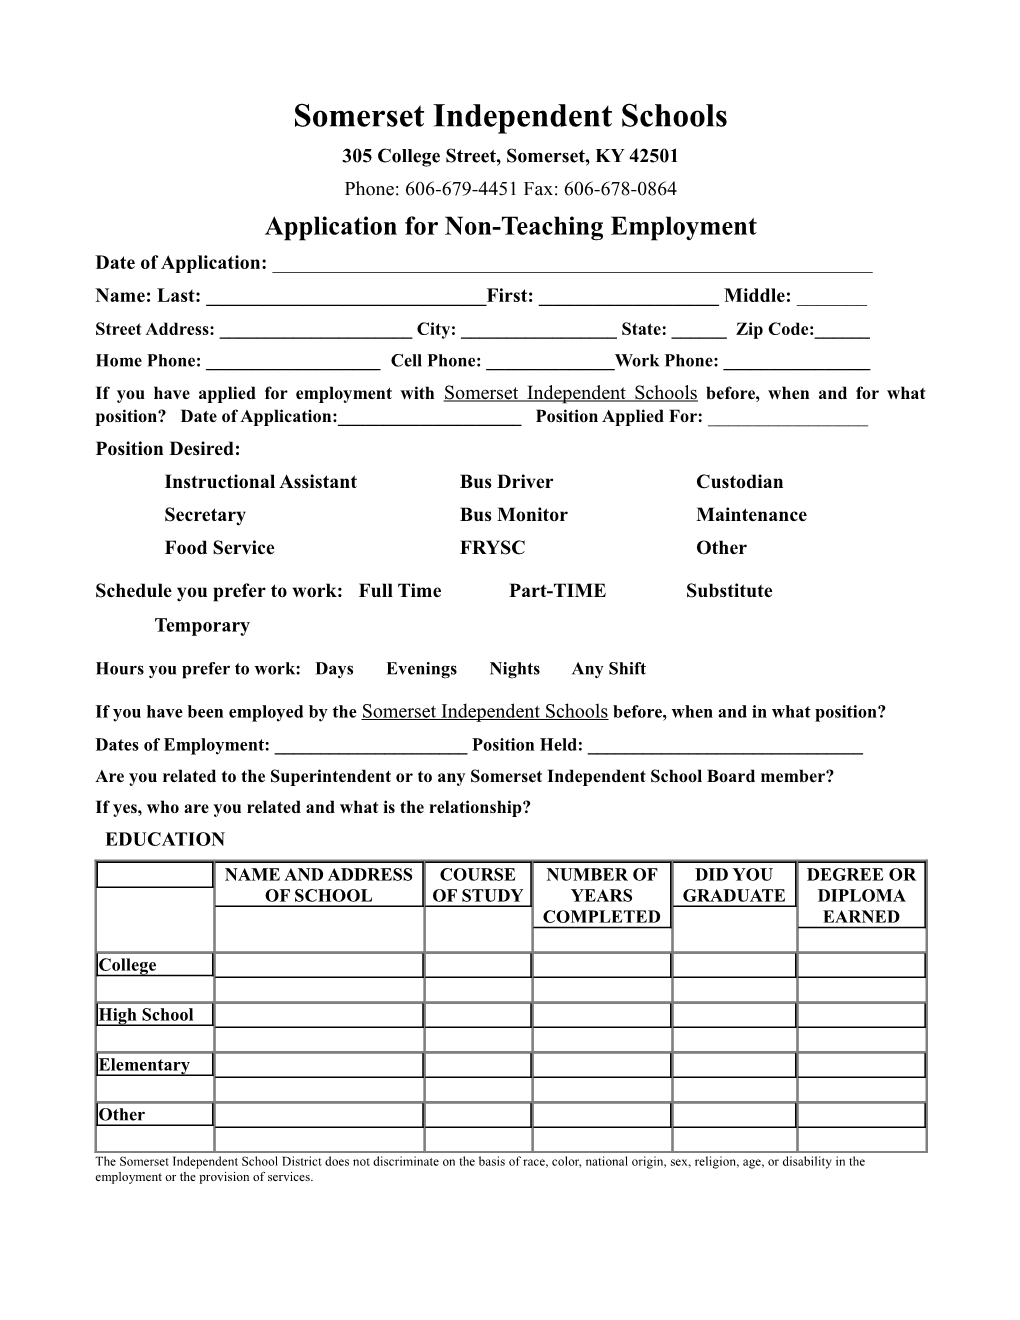 Application for Non-Teaching Employment